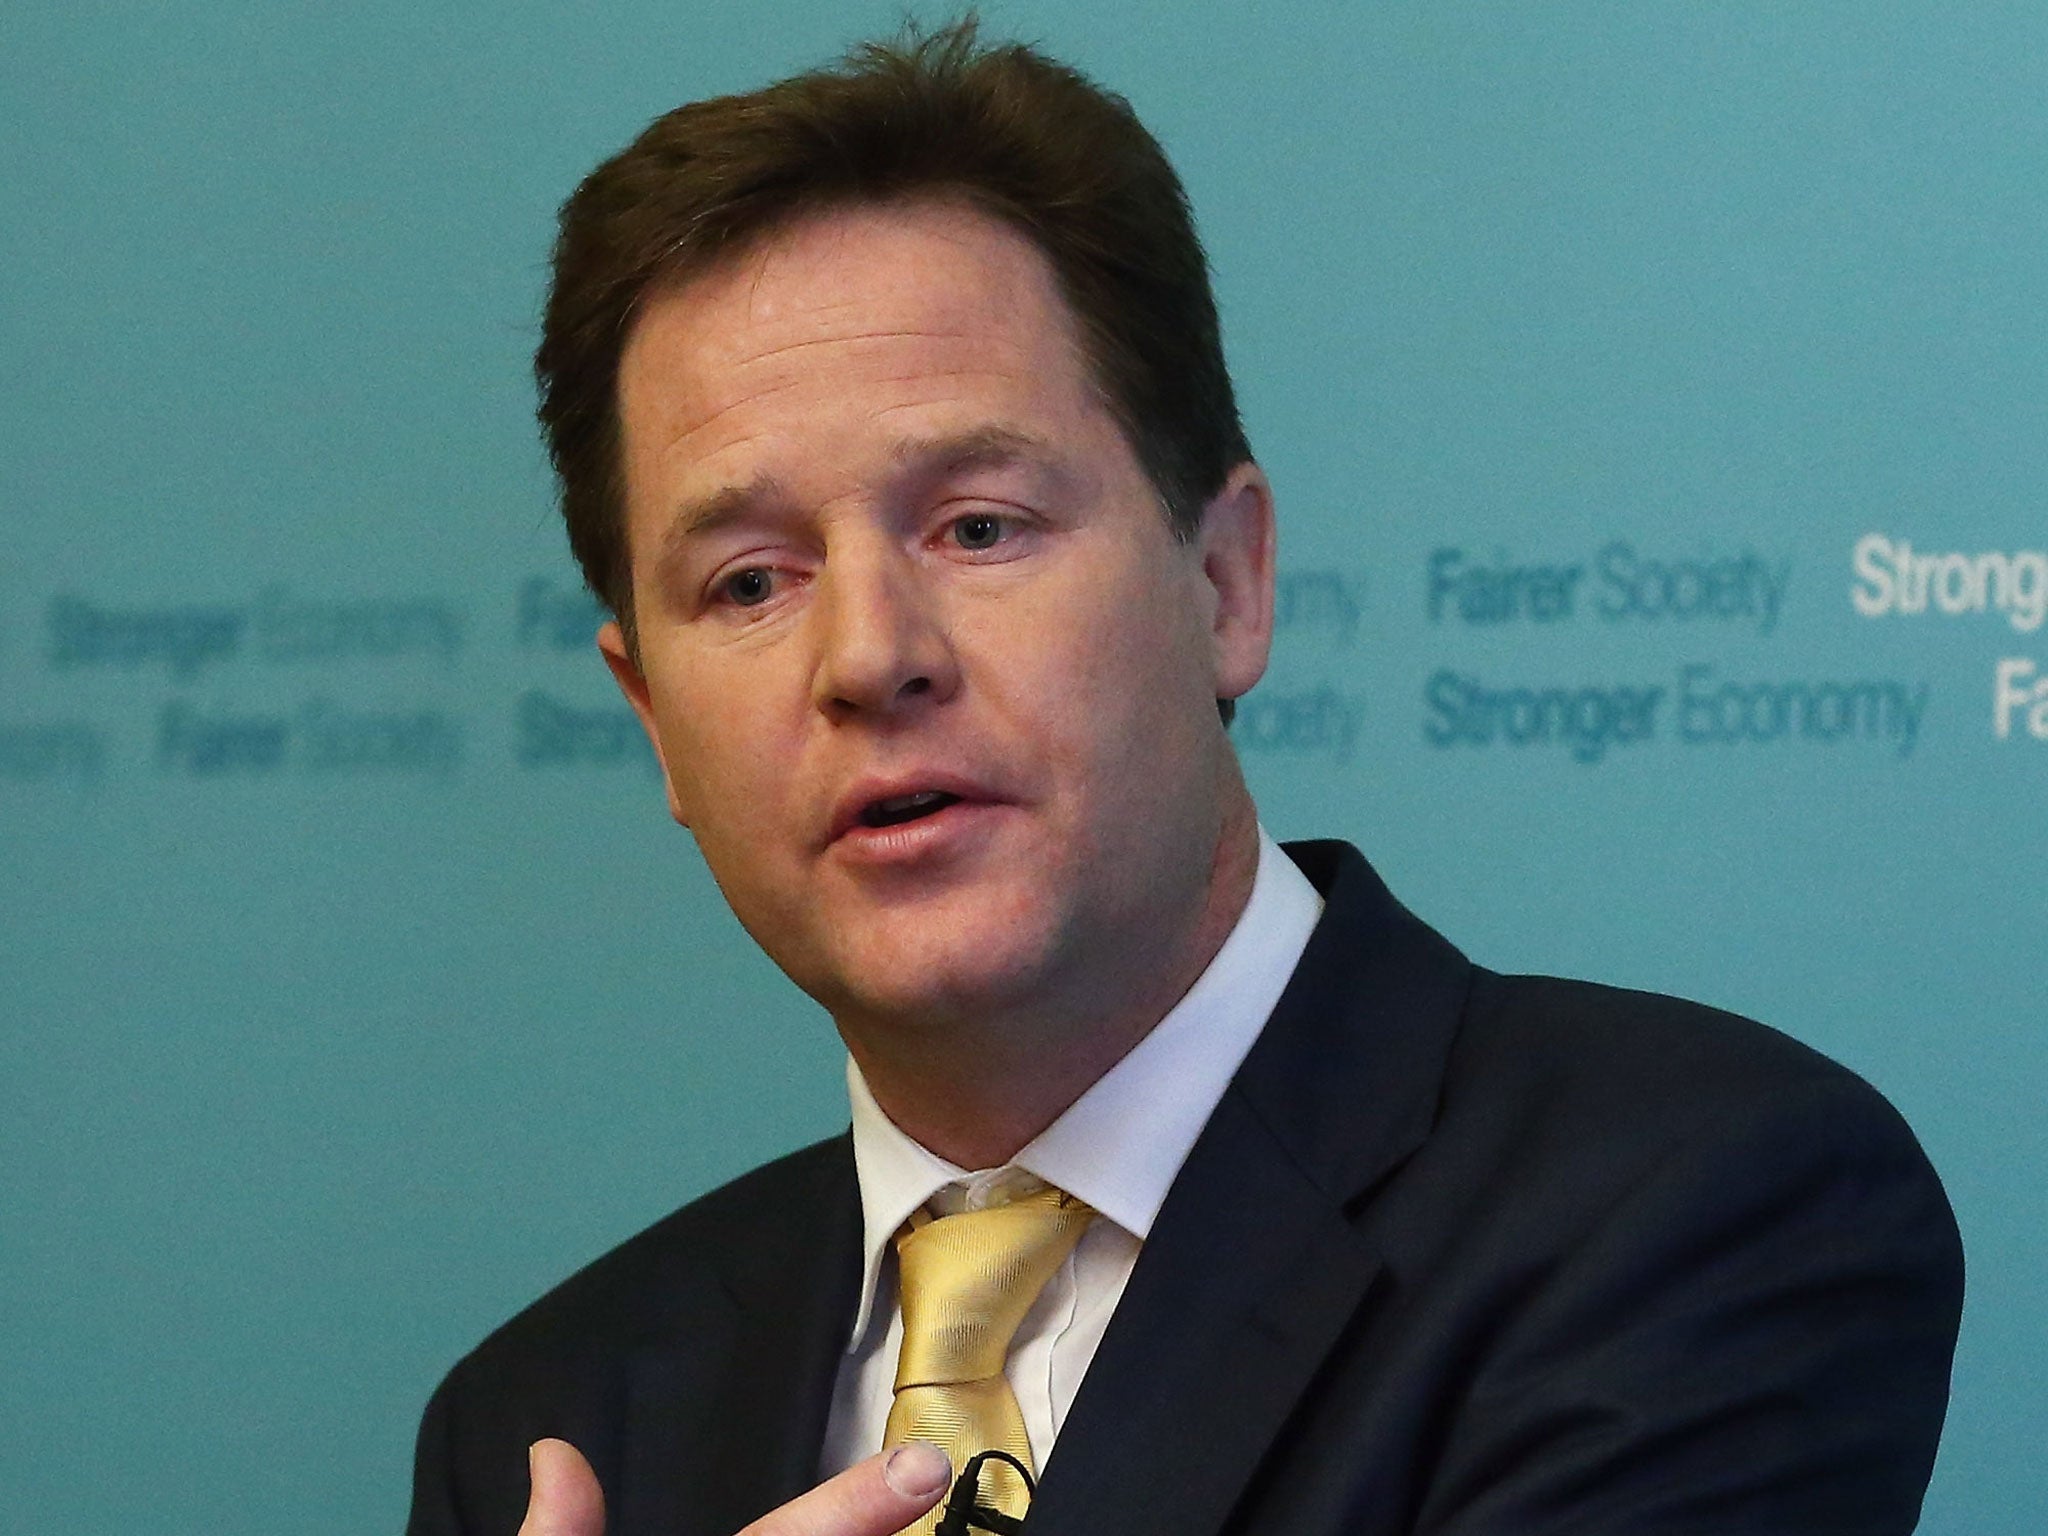 Anti-sleaze reforms will not be abandoned, Nick Clegg vowed after two peers were suspended by their party